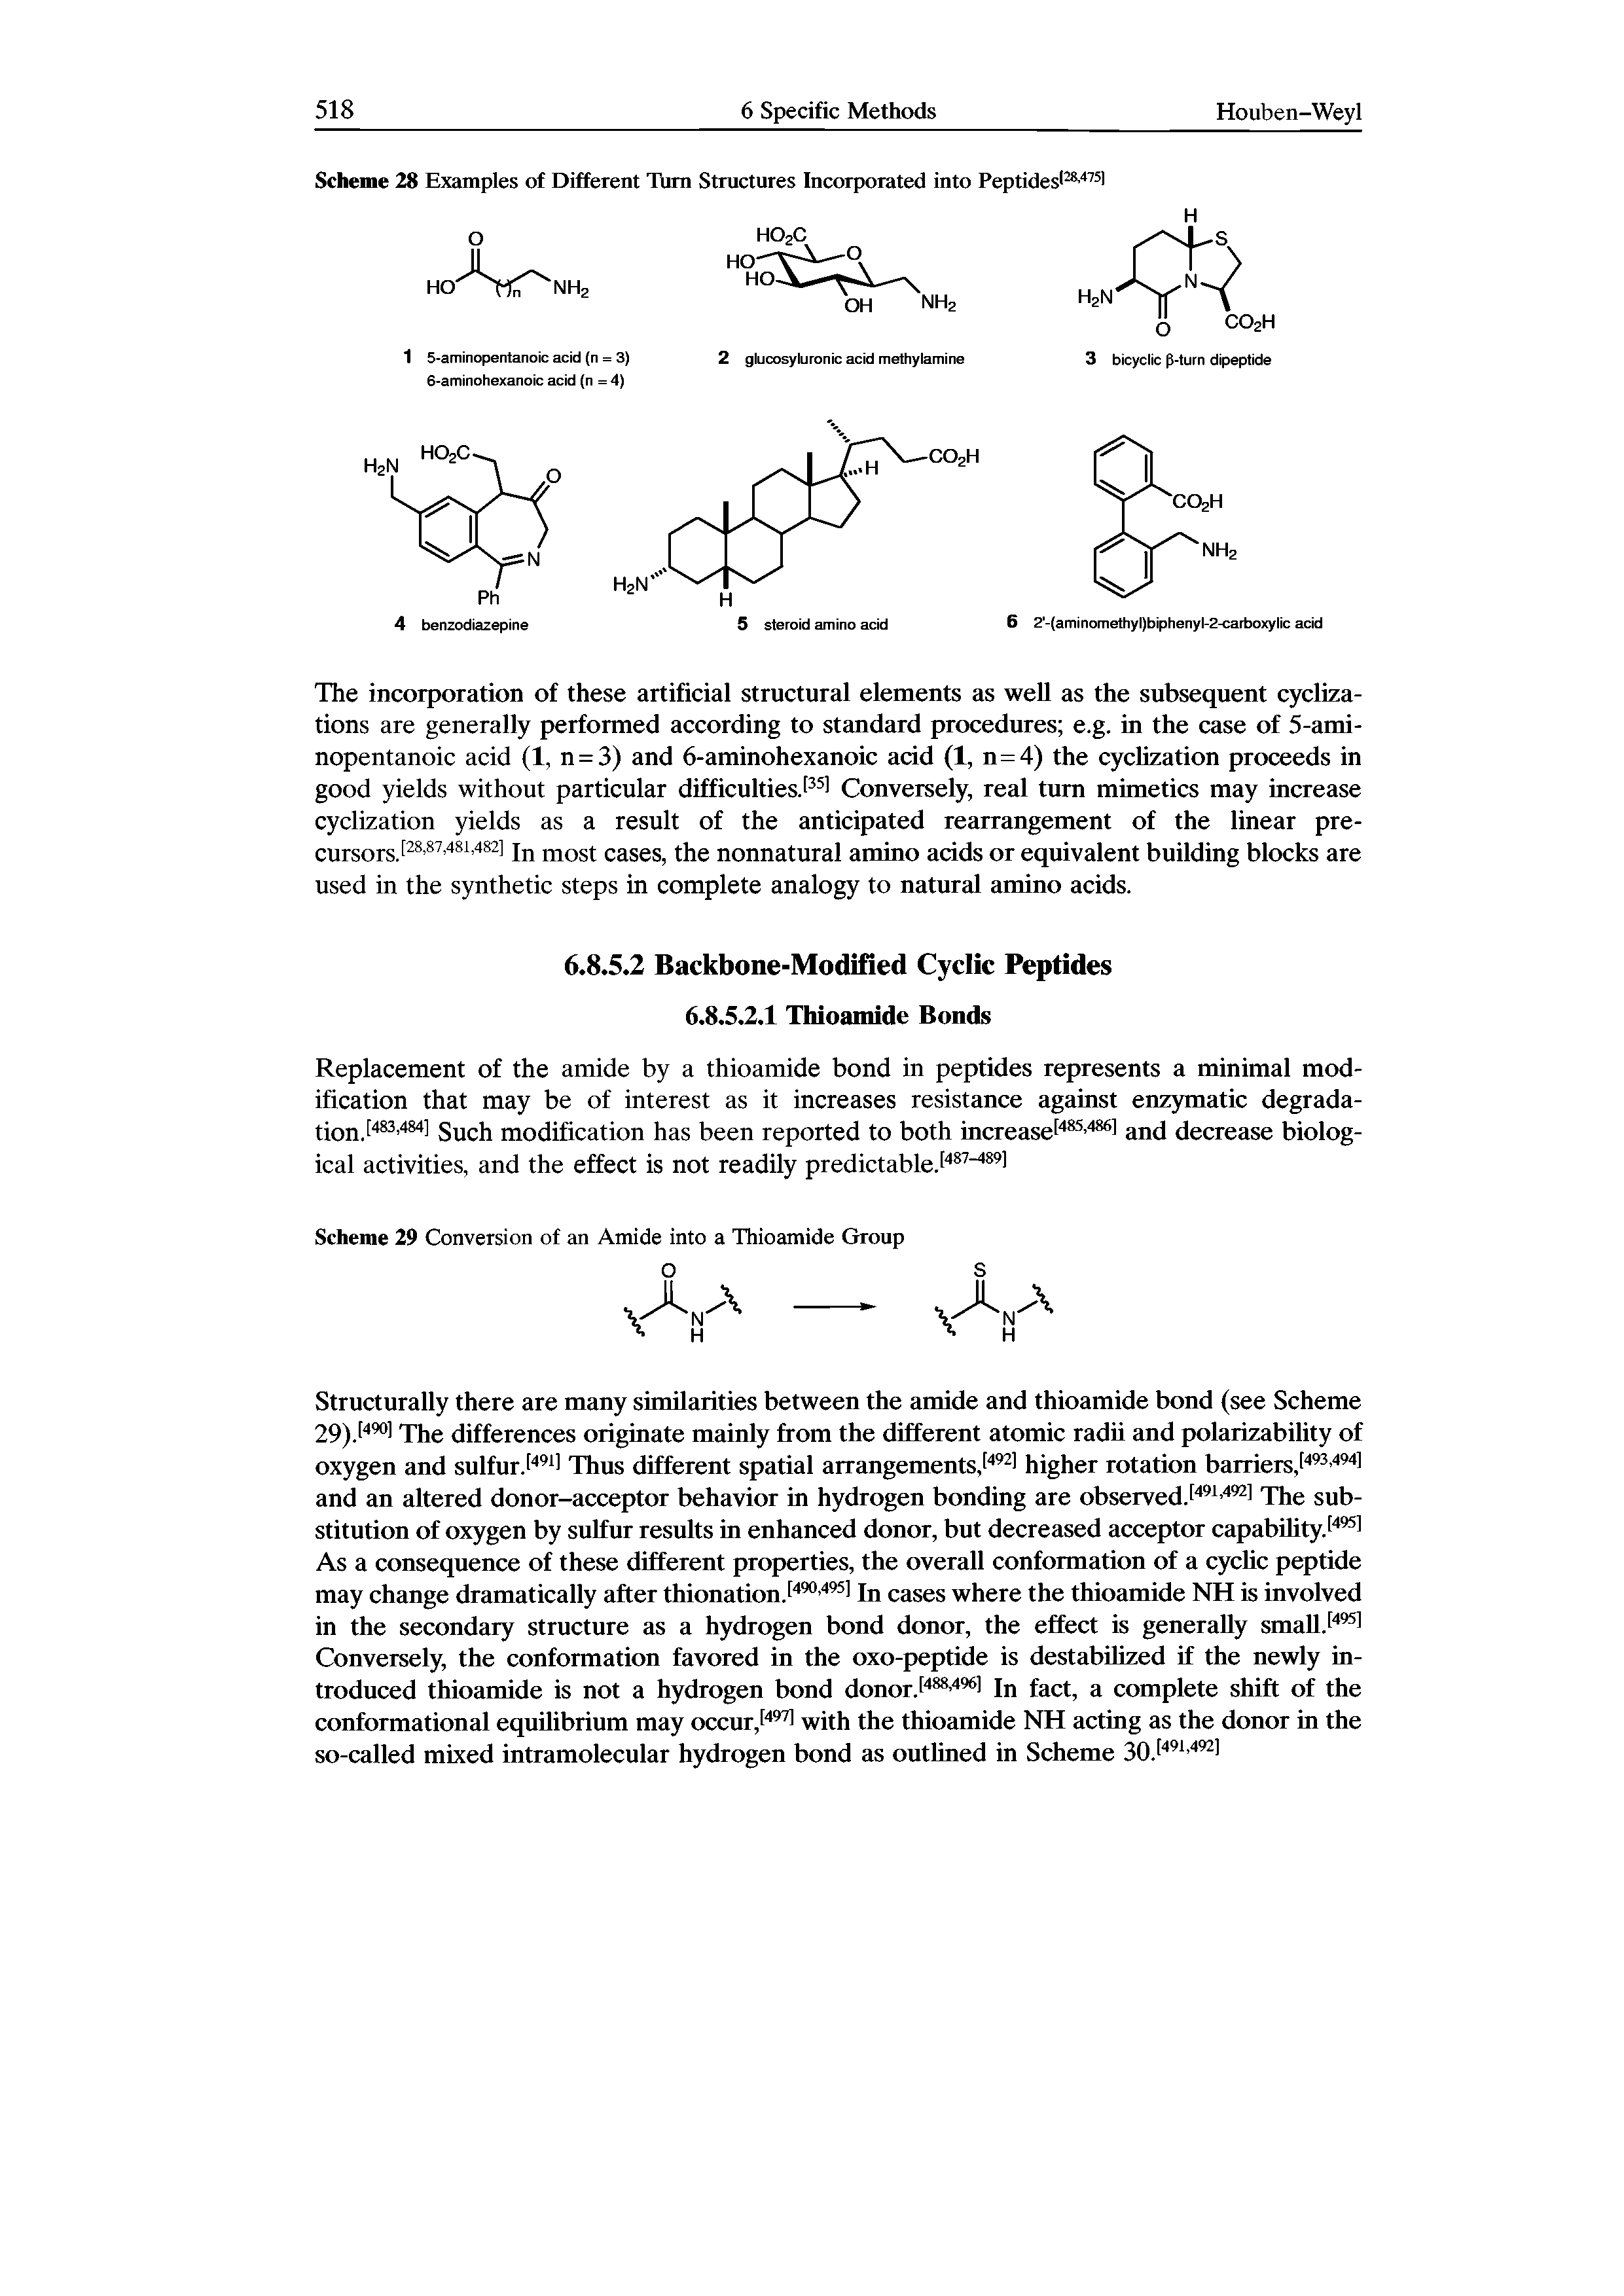 Scheme 29 Conversion of an Amide into a Thioamide Group...